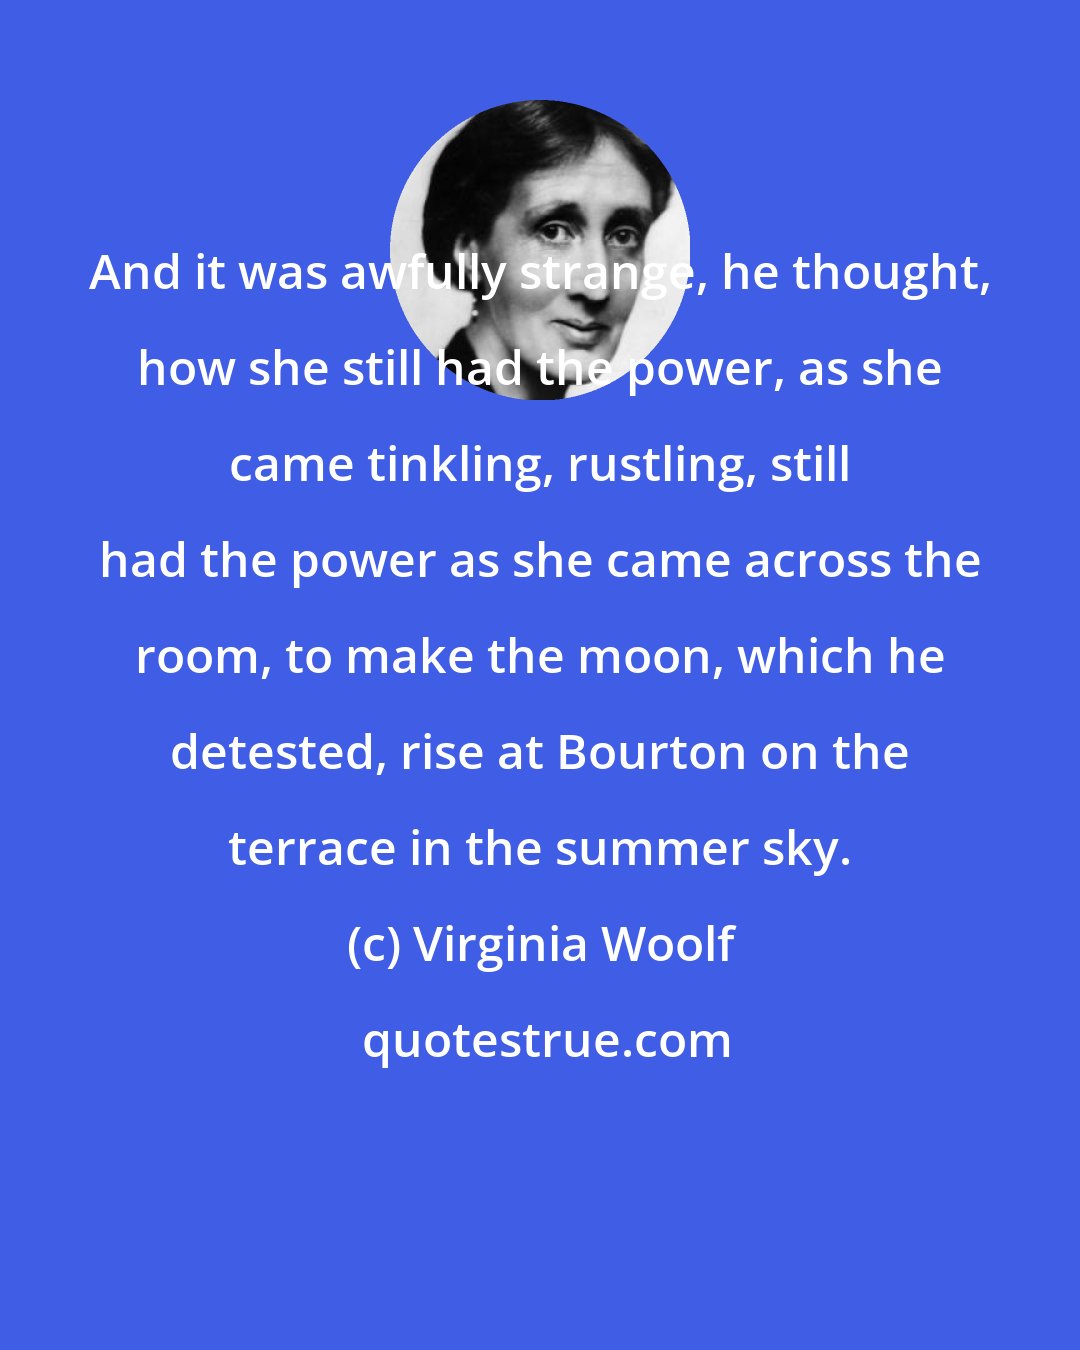 Virginia Woolf: And it was awfully strange, he thought, how she still had the power, as she came tinkling, rustling, still had the power as she came across the room, to make the moon, which he detested, rise at Bourton on the terrace in the summer sky.